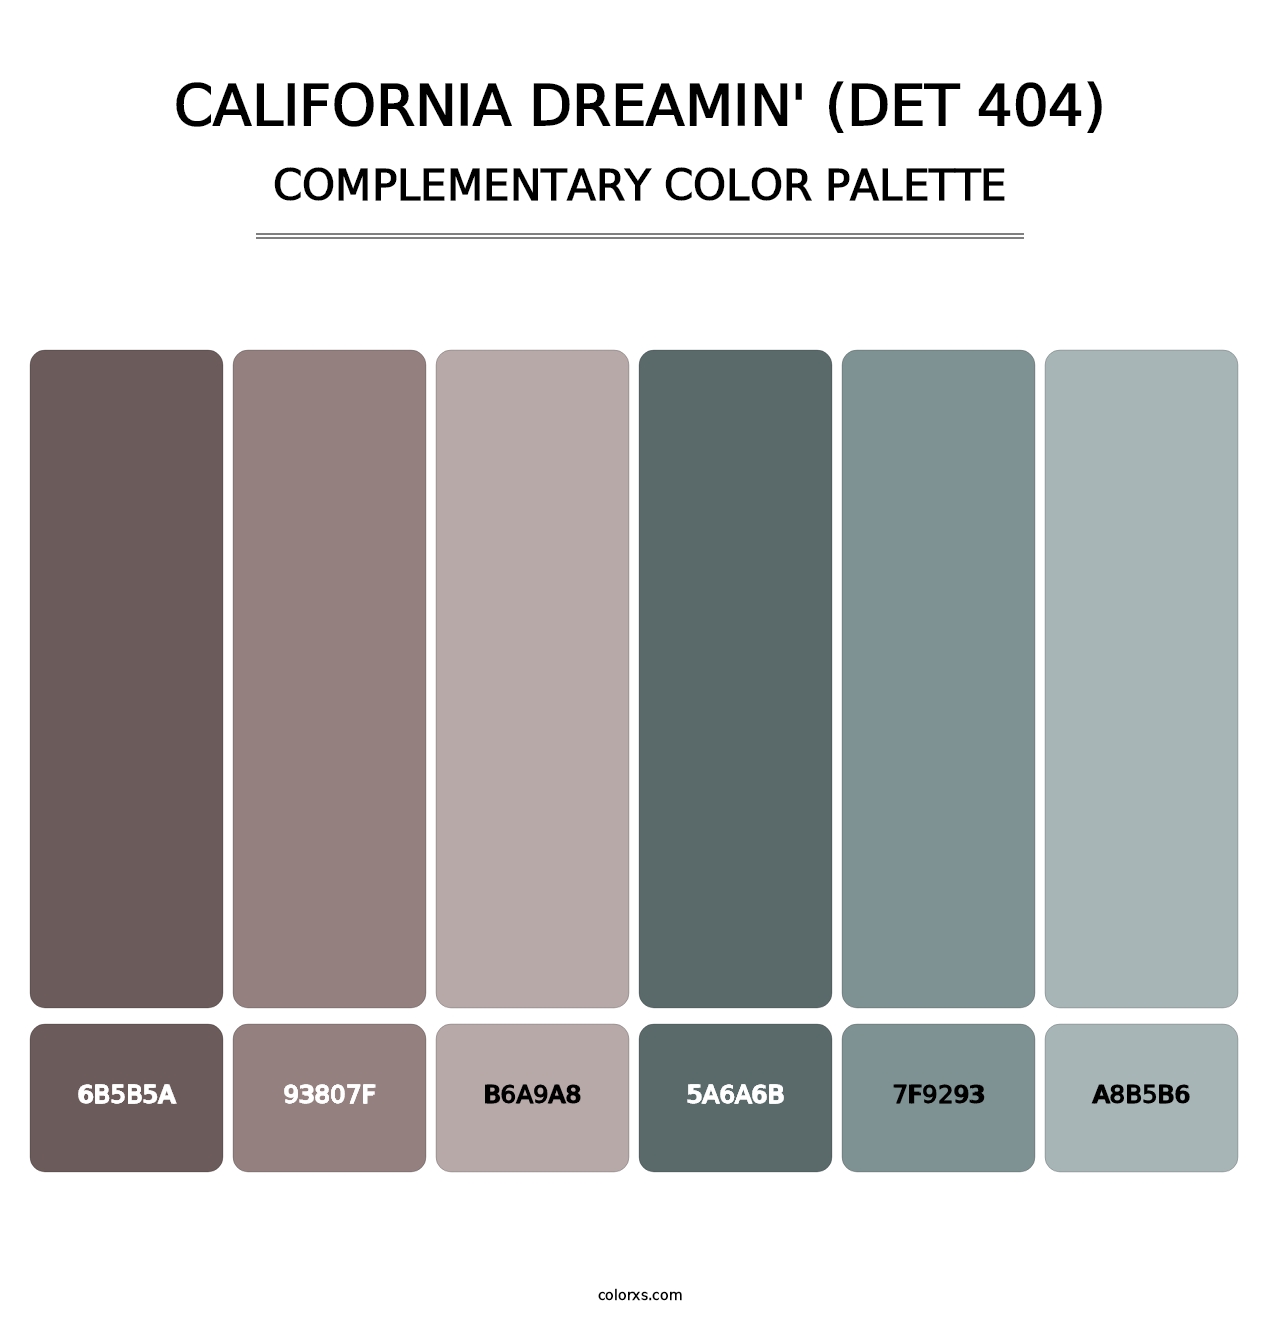 California Dreamin' (DET 404) - Complementary Color Palette